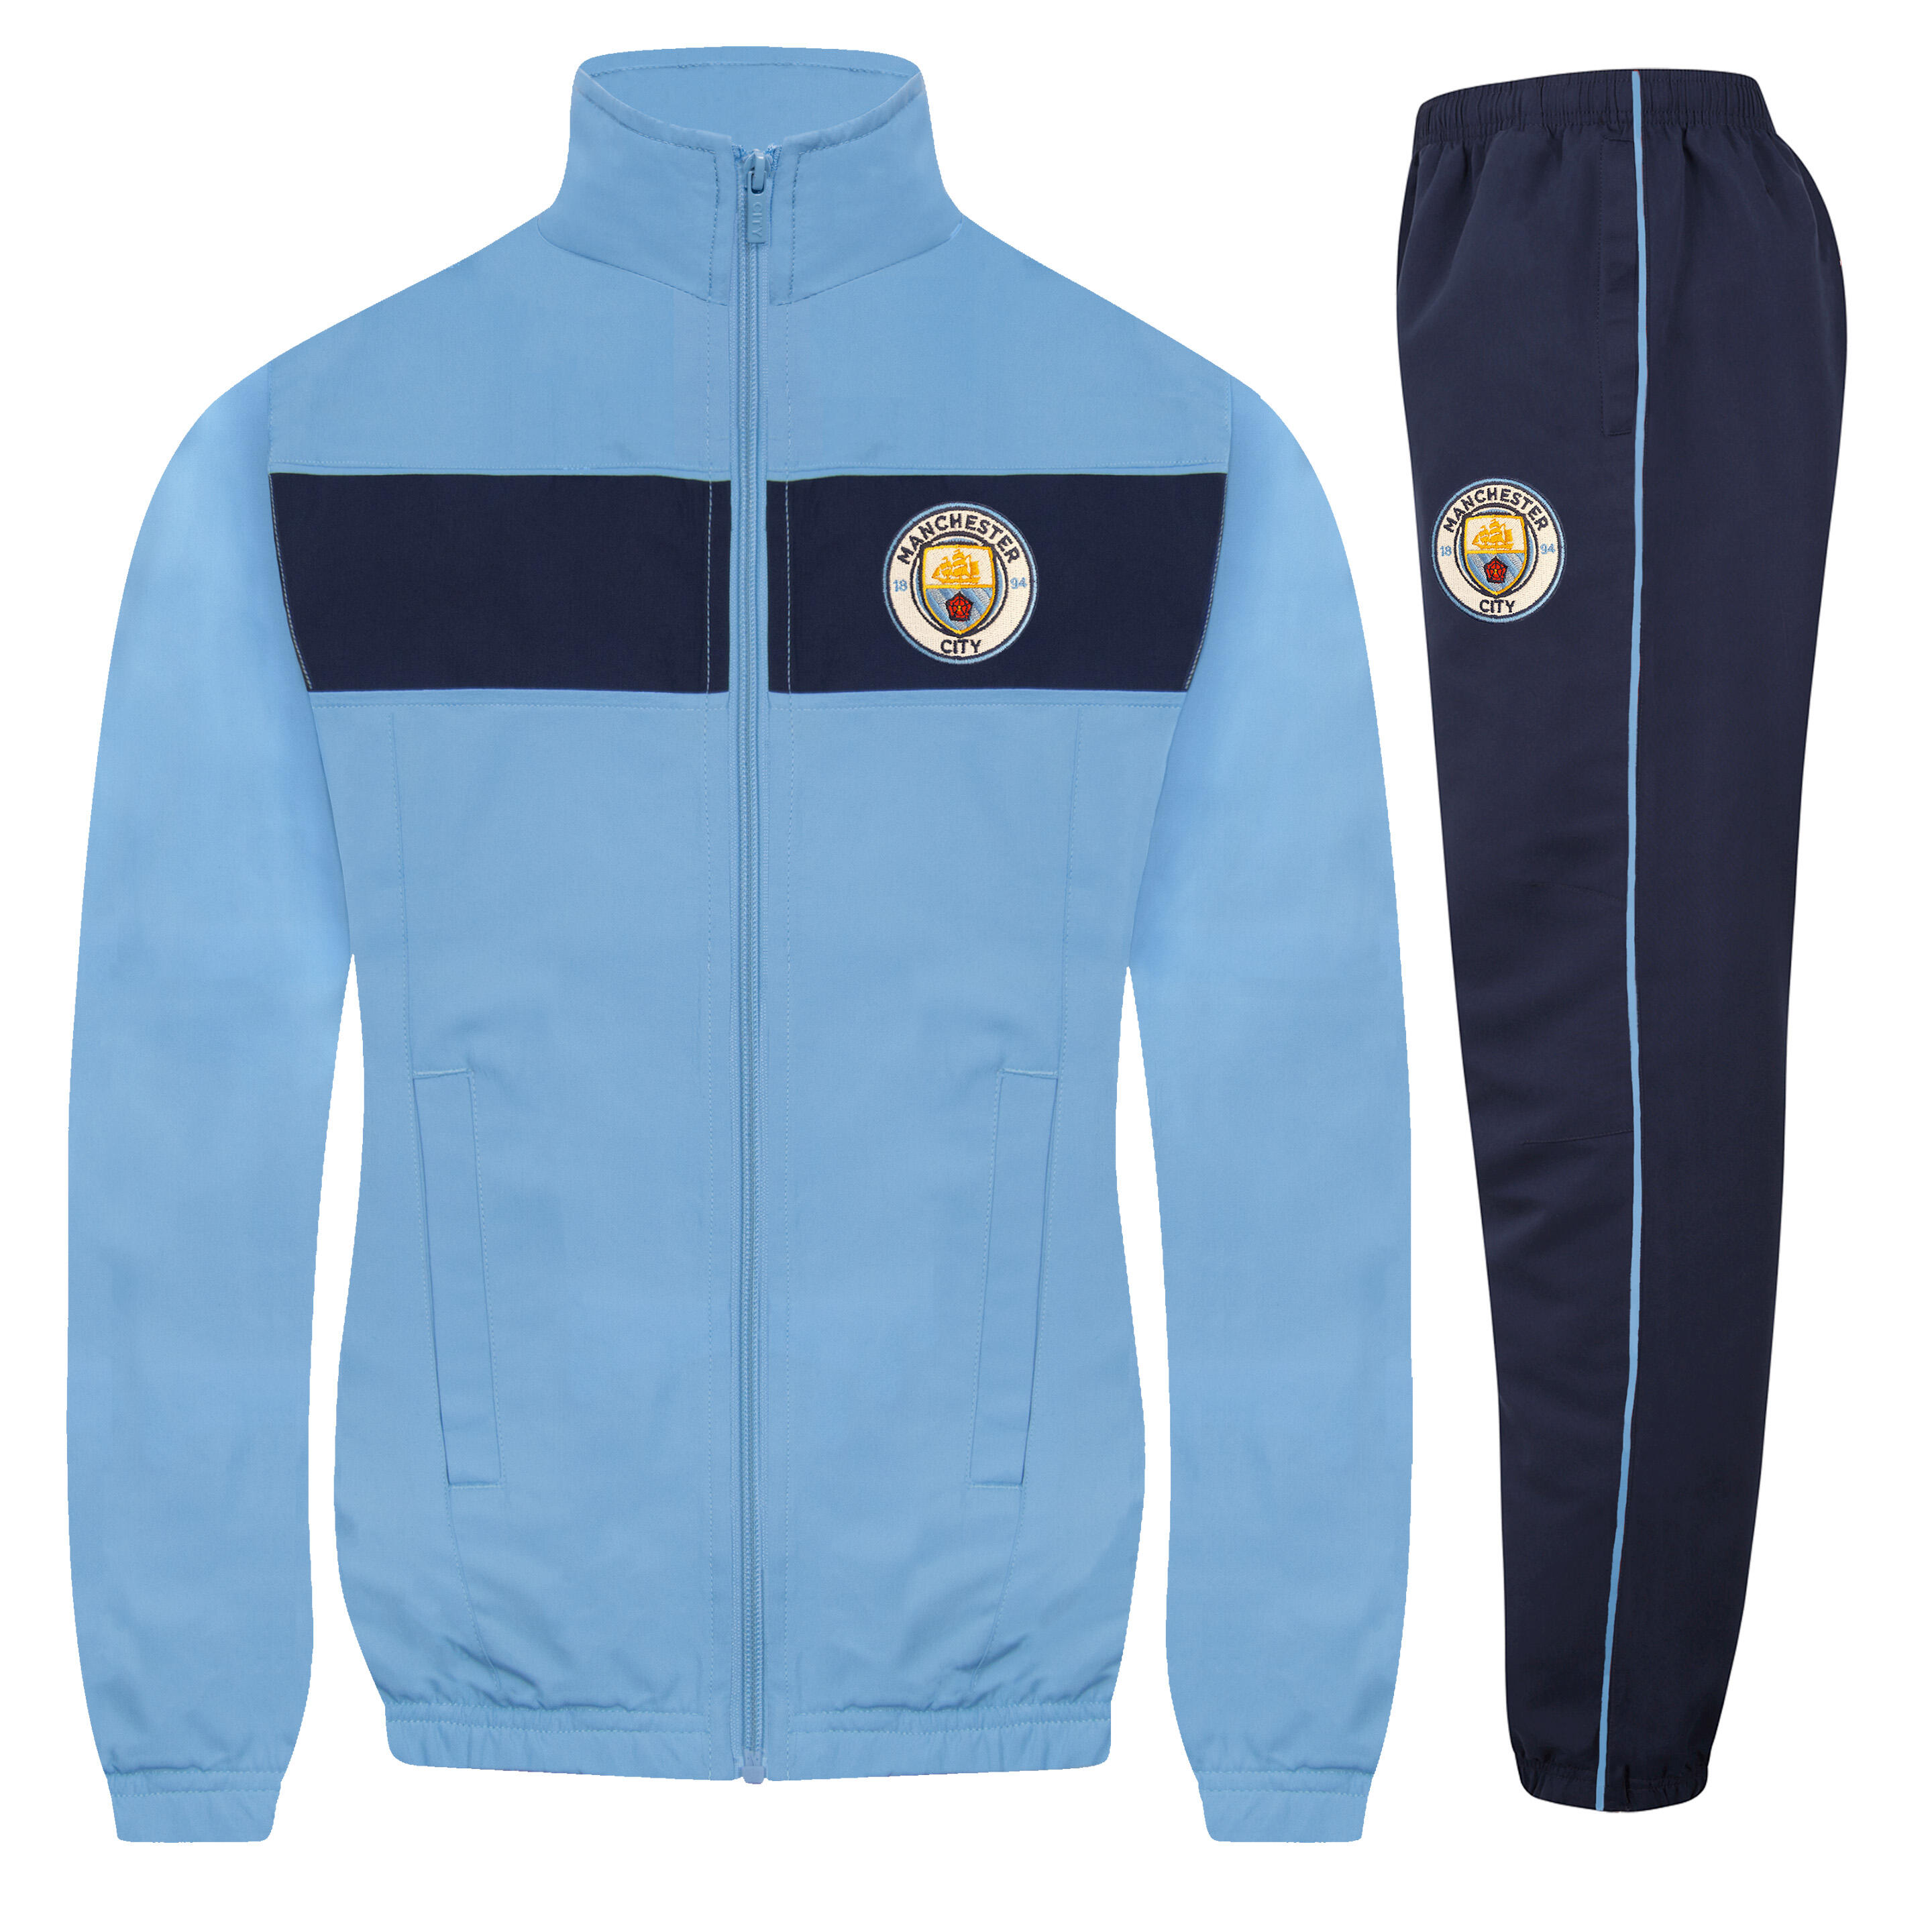 Manchester City Boys Tracksuit Jacket & Pants Set Kids OFFICIAL Football Gift 1/6